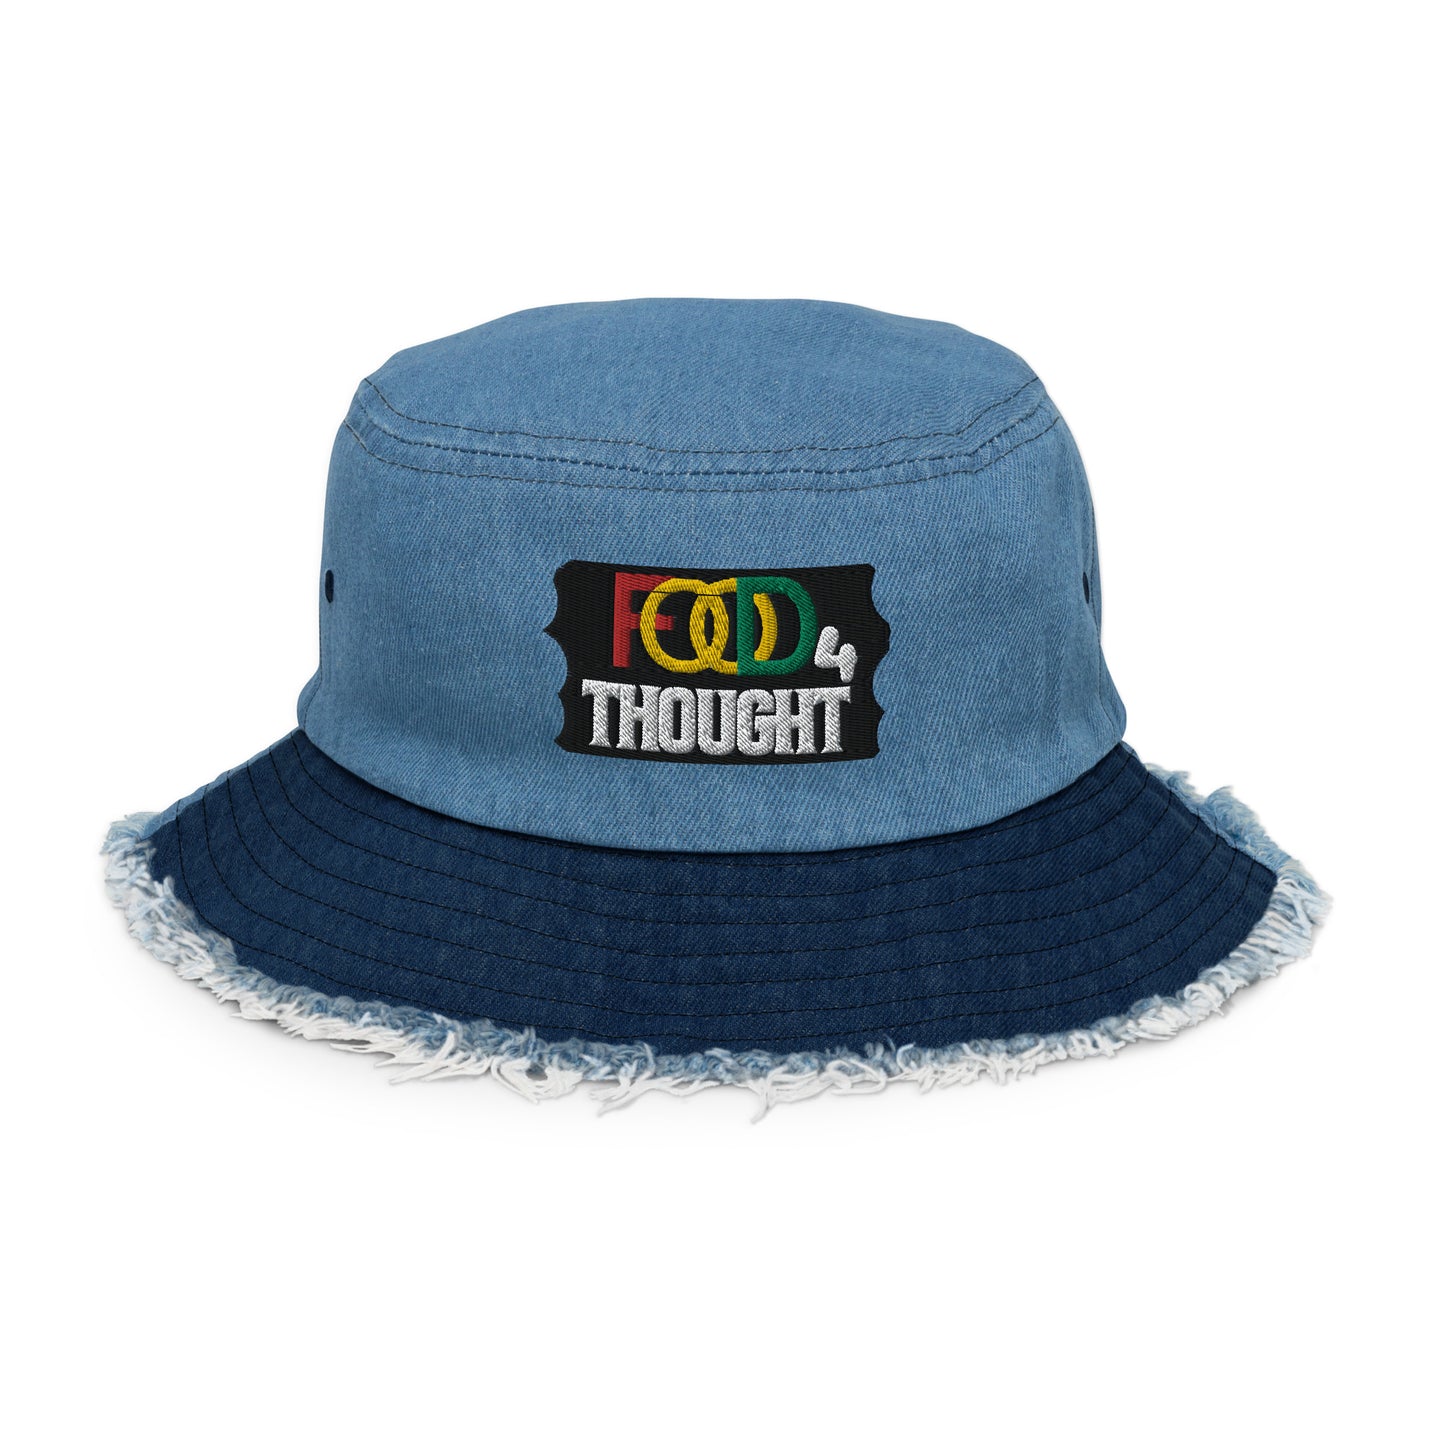 Food For Thought Embroidery Distressed Denim Bucket Hat